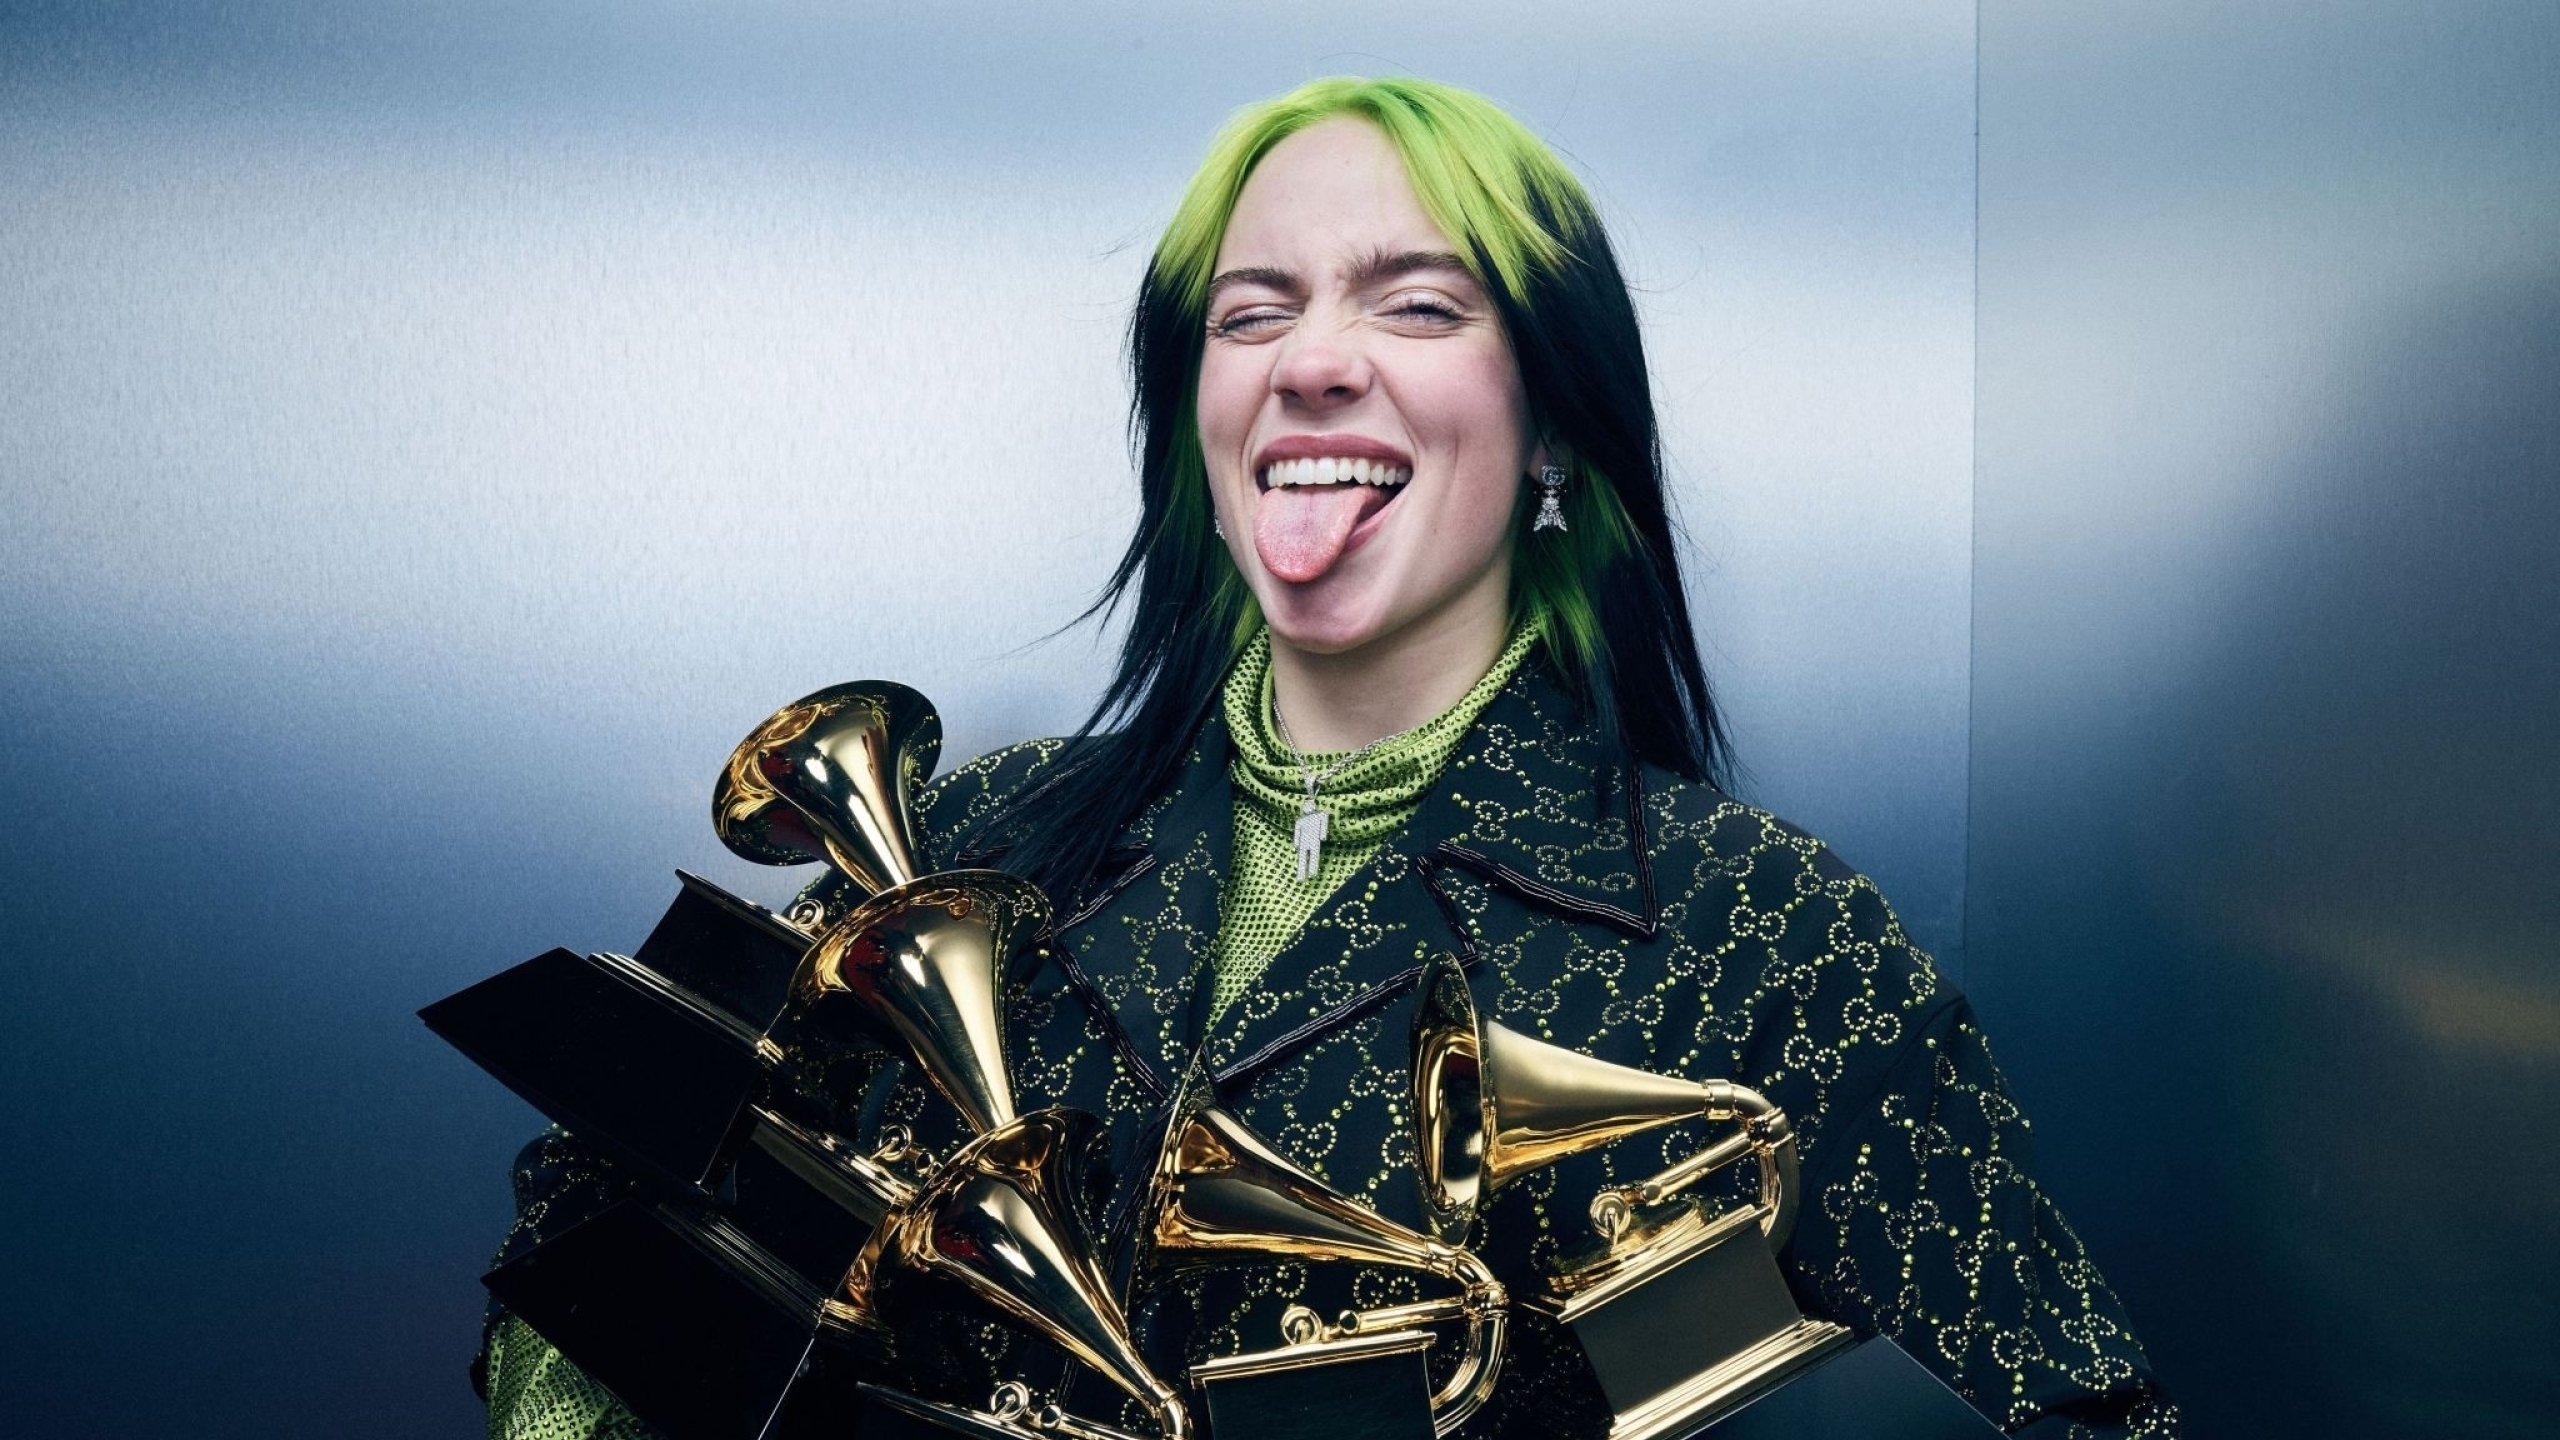 10. Billie Eilish's blue hair and black and green outfit from her "No Time to Die" music video for the James Bond film - wide 6